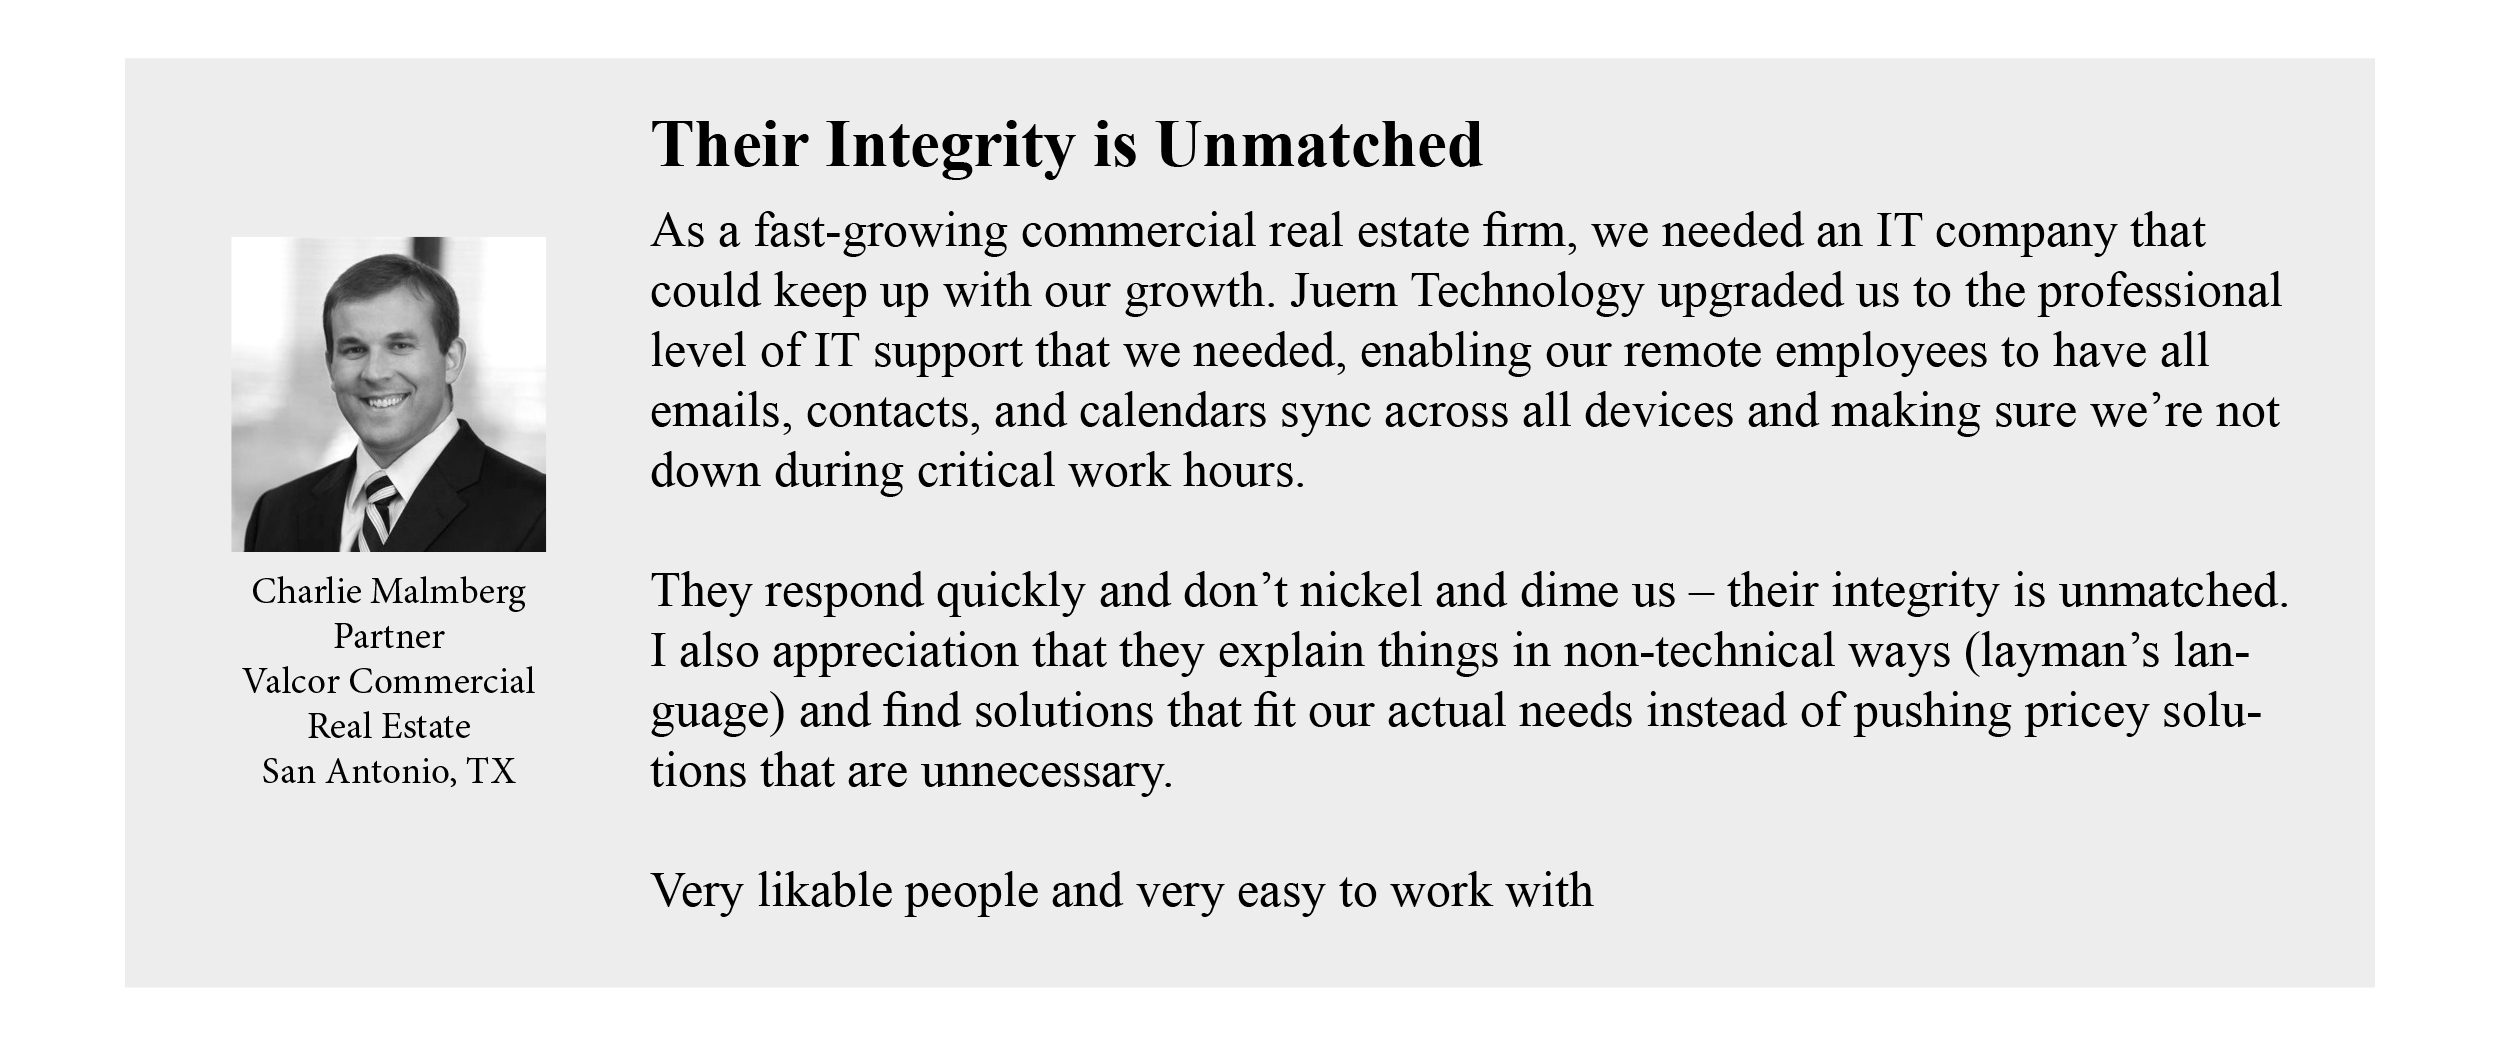 Charlie Malmberg Client Testimonial for Juern Technology Managed Services Provider for San Antonio businesses